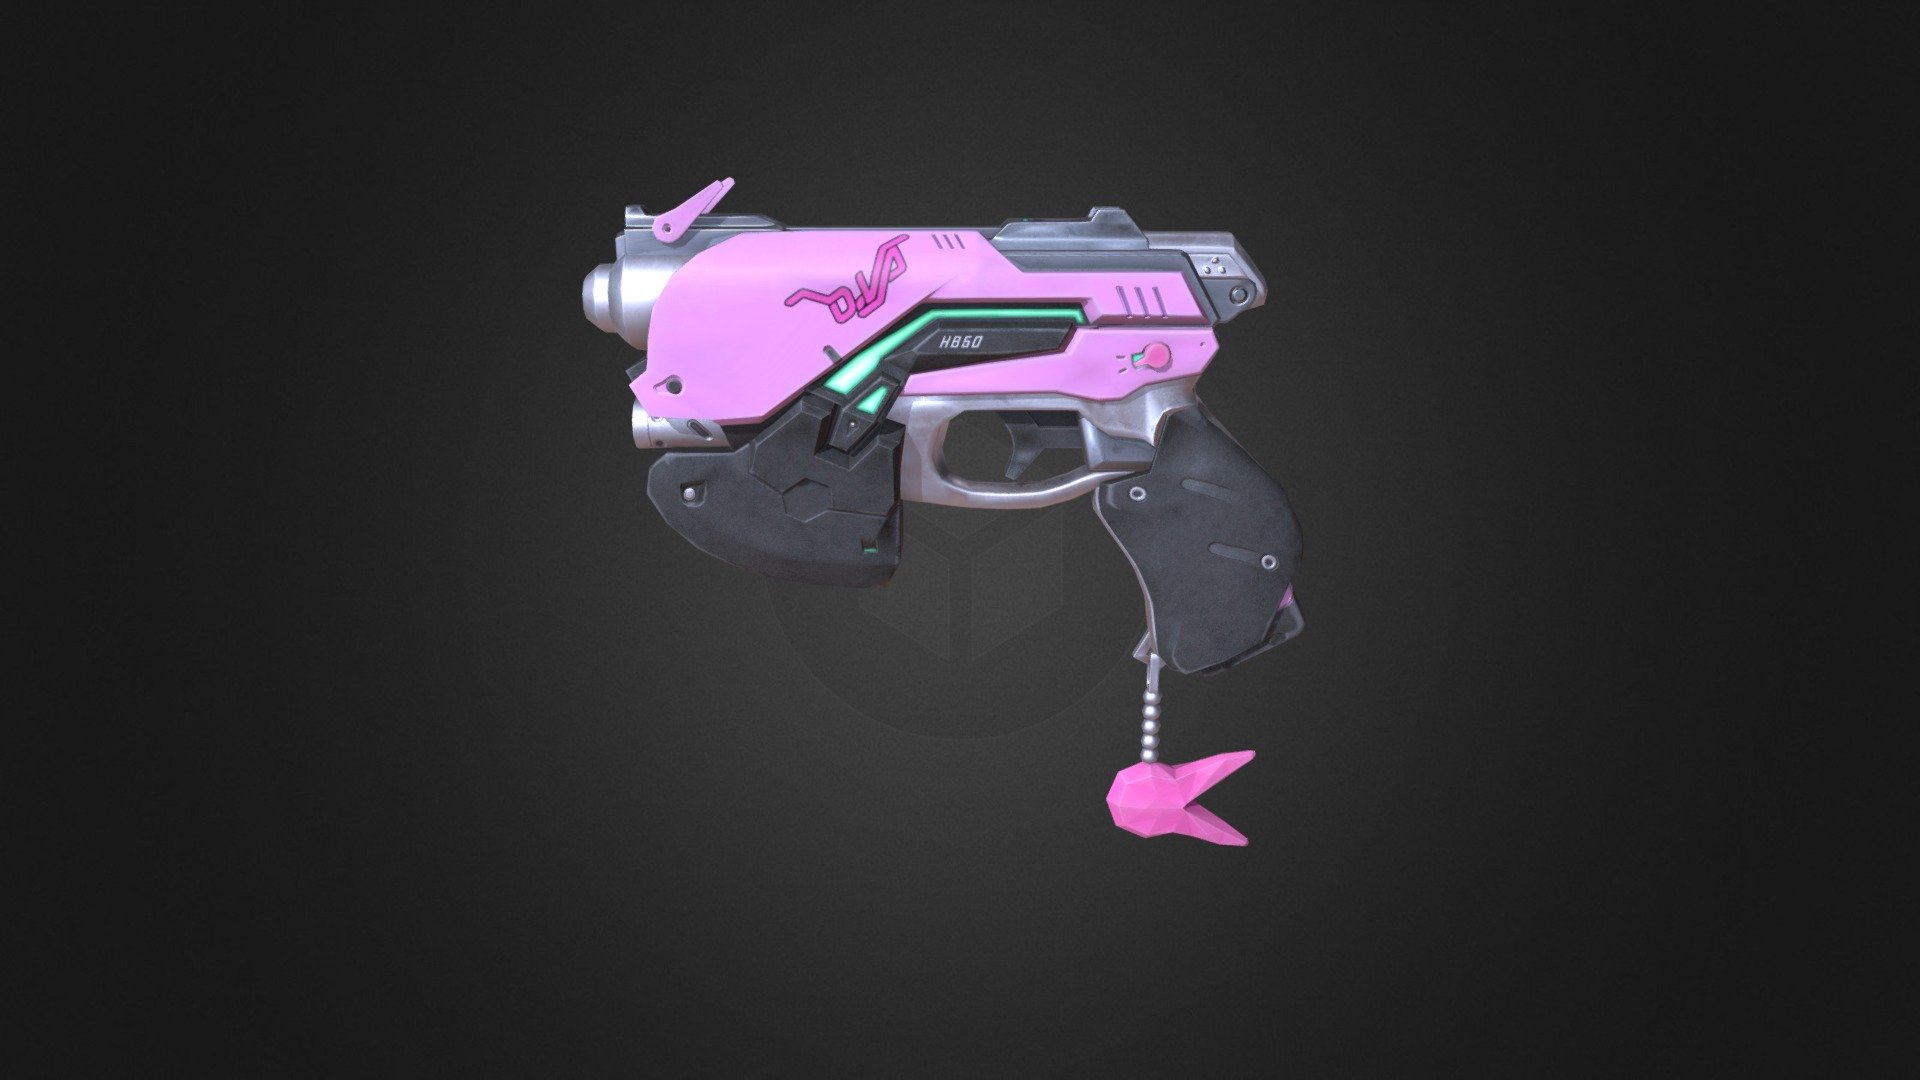 Hello there!

I made a recreation of D.va's pistol from Overwatch.
It was fun to made and i learned a lot!

Texture: 2048x2048

Overwatch @ Blizzard Entertainment - D.va Pistol - 3D model by theeye 3d model